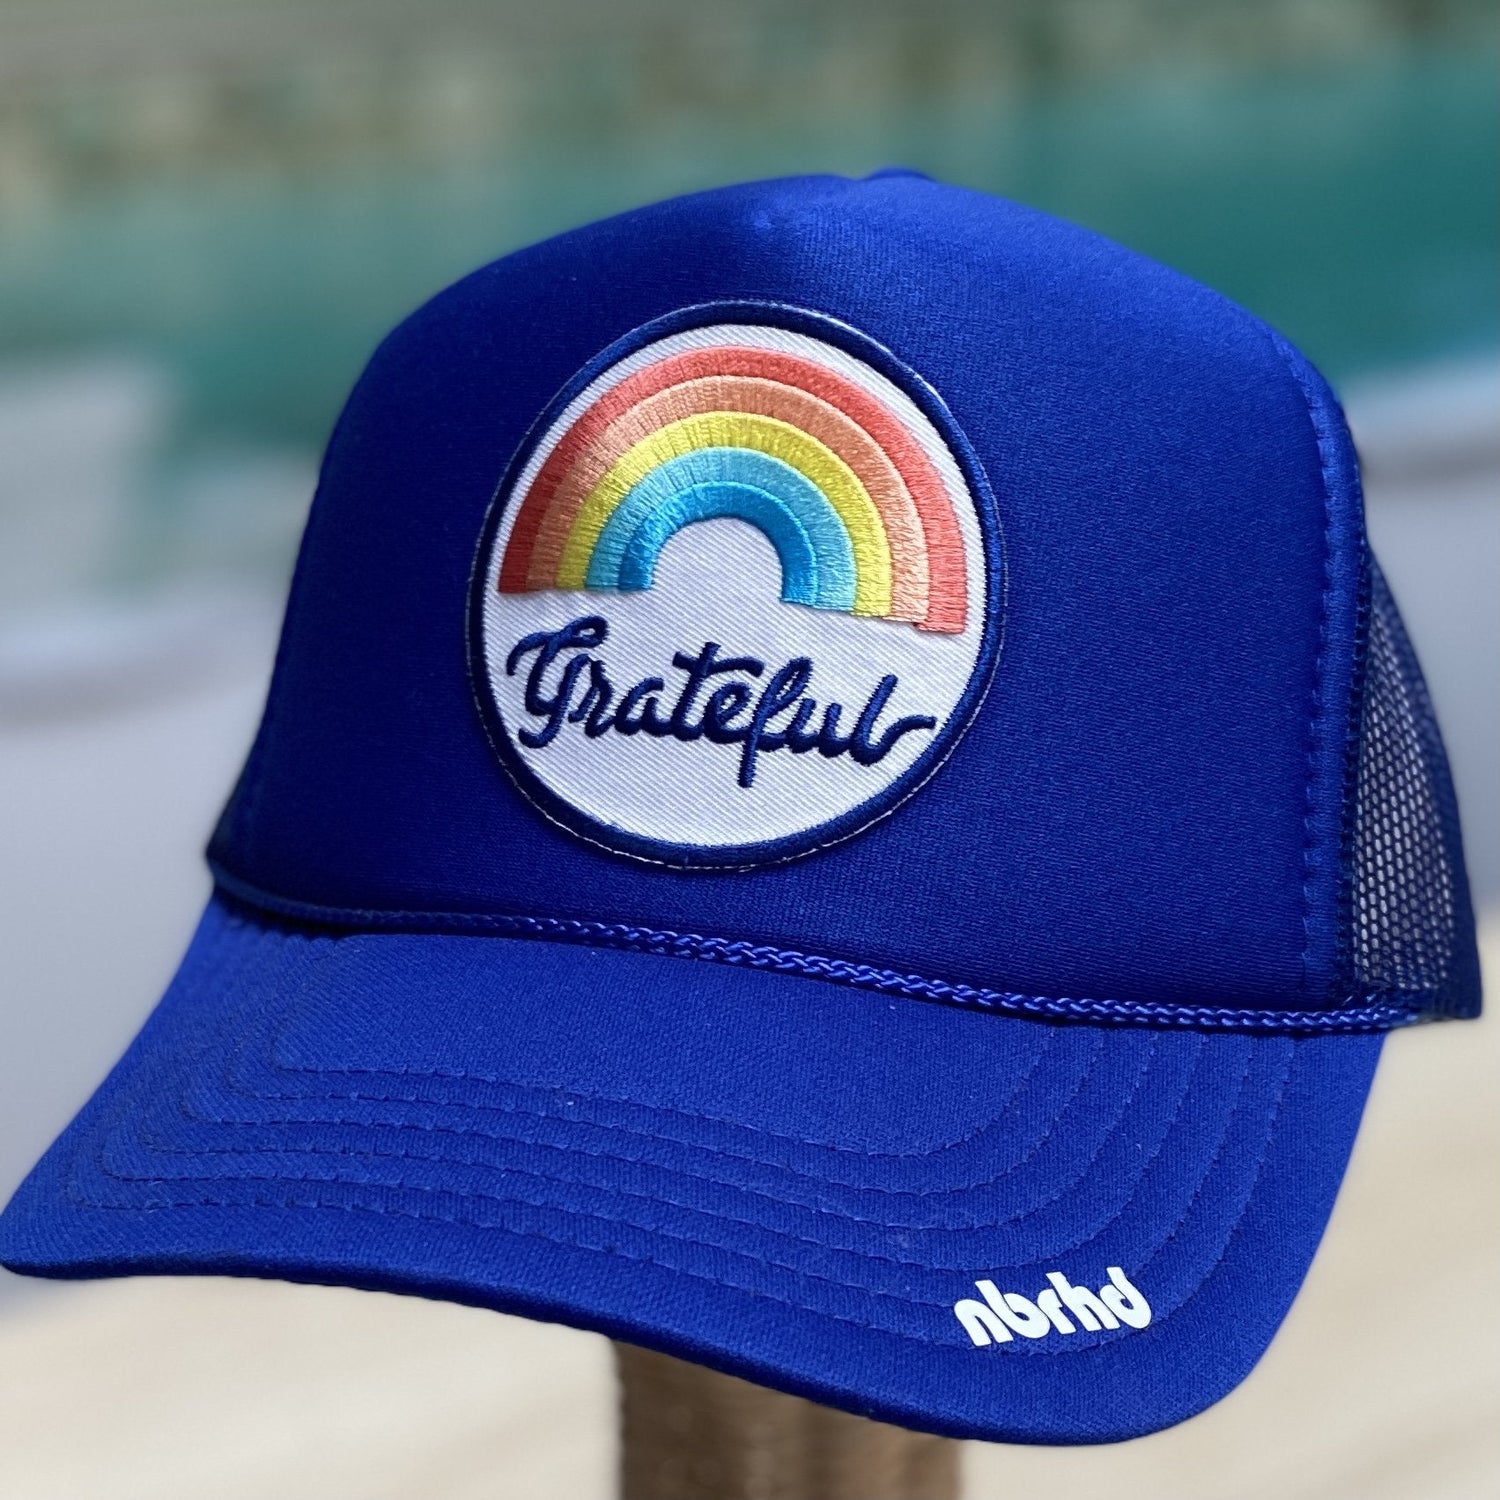 Grateful Patch Trucker Hat - The Riviera Towel Company